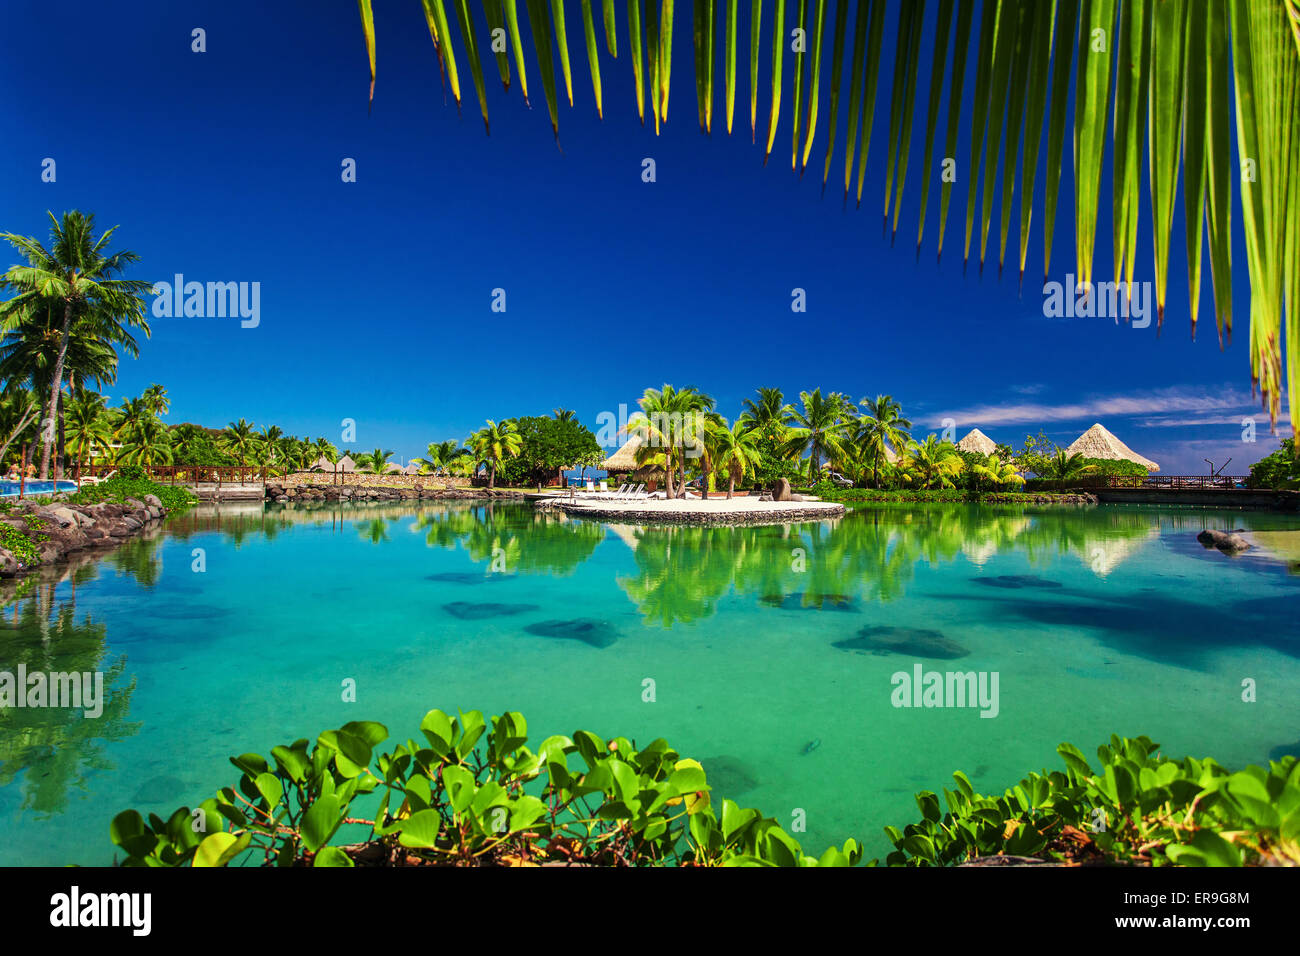 Tropical resort with a green lagoon and palm trees around the frame Stock Photo